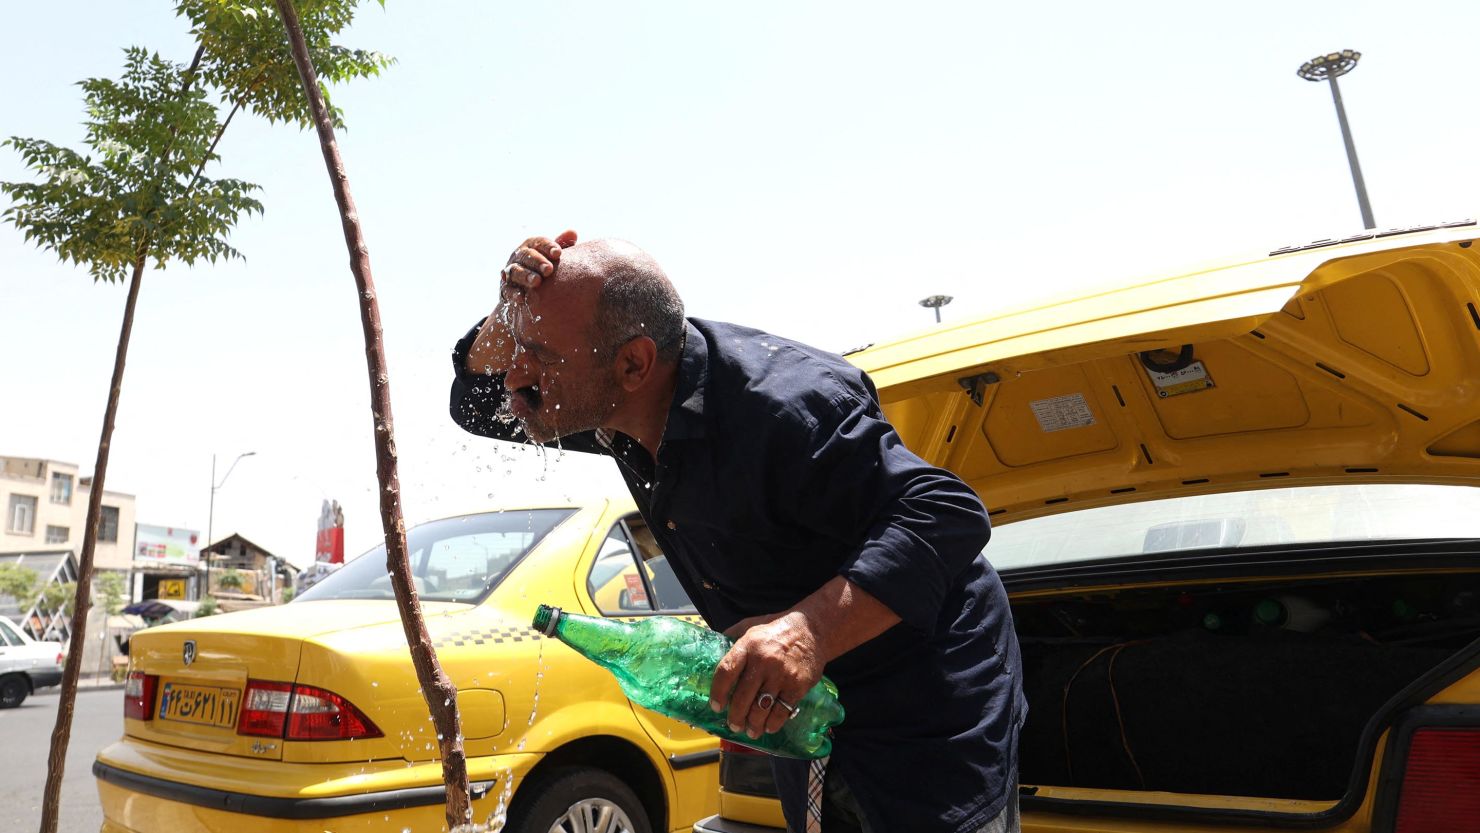 A taxi driver splashes water on himself to cool down during the heat surge in Tehran, Iran August 2, 2023.